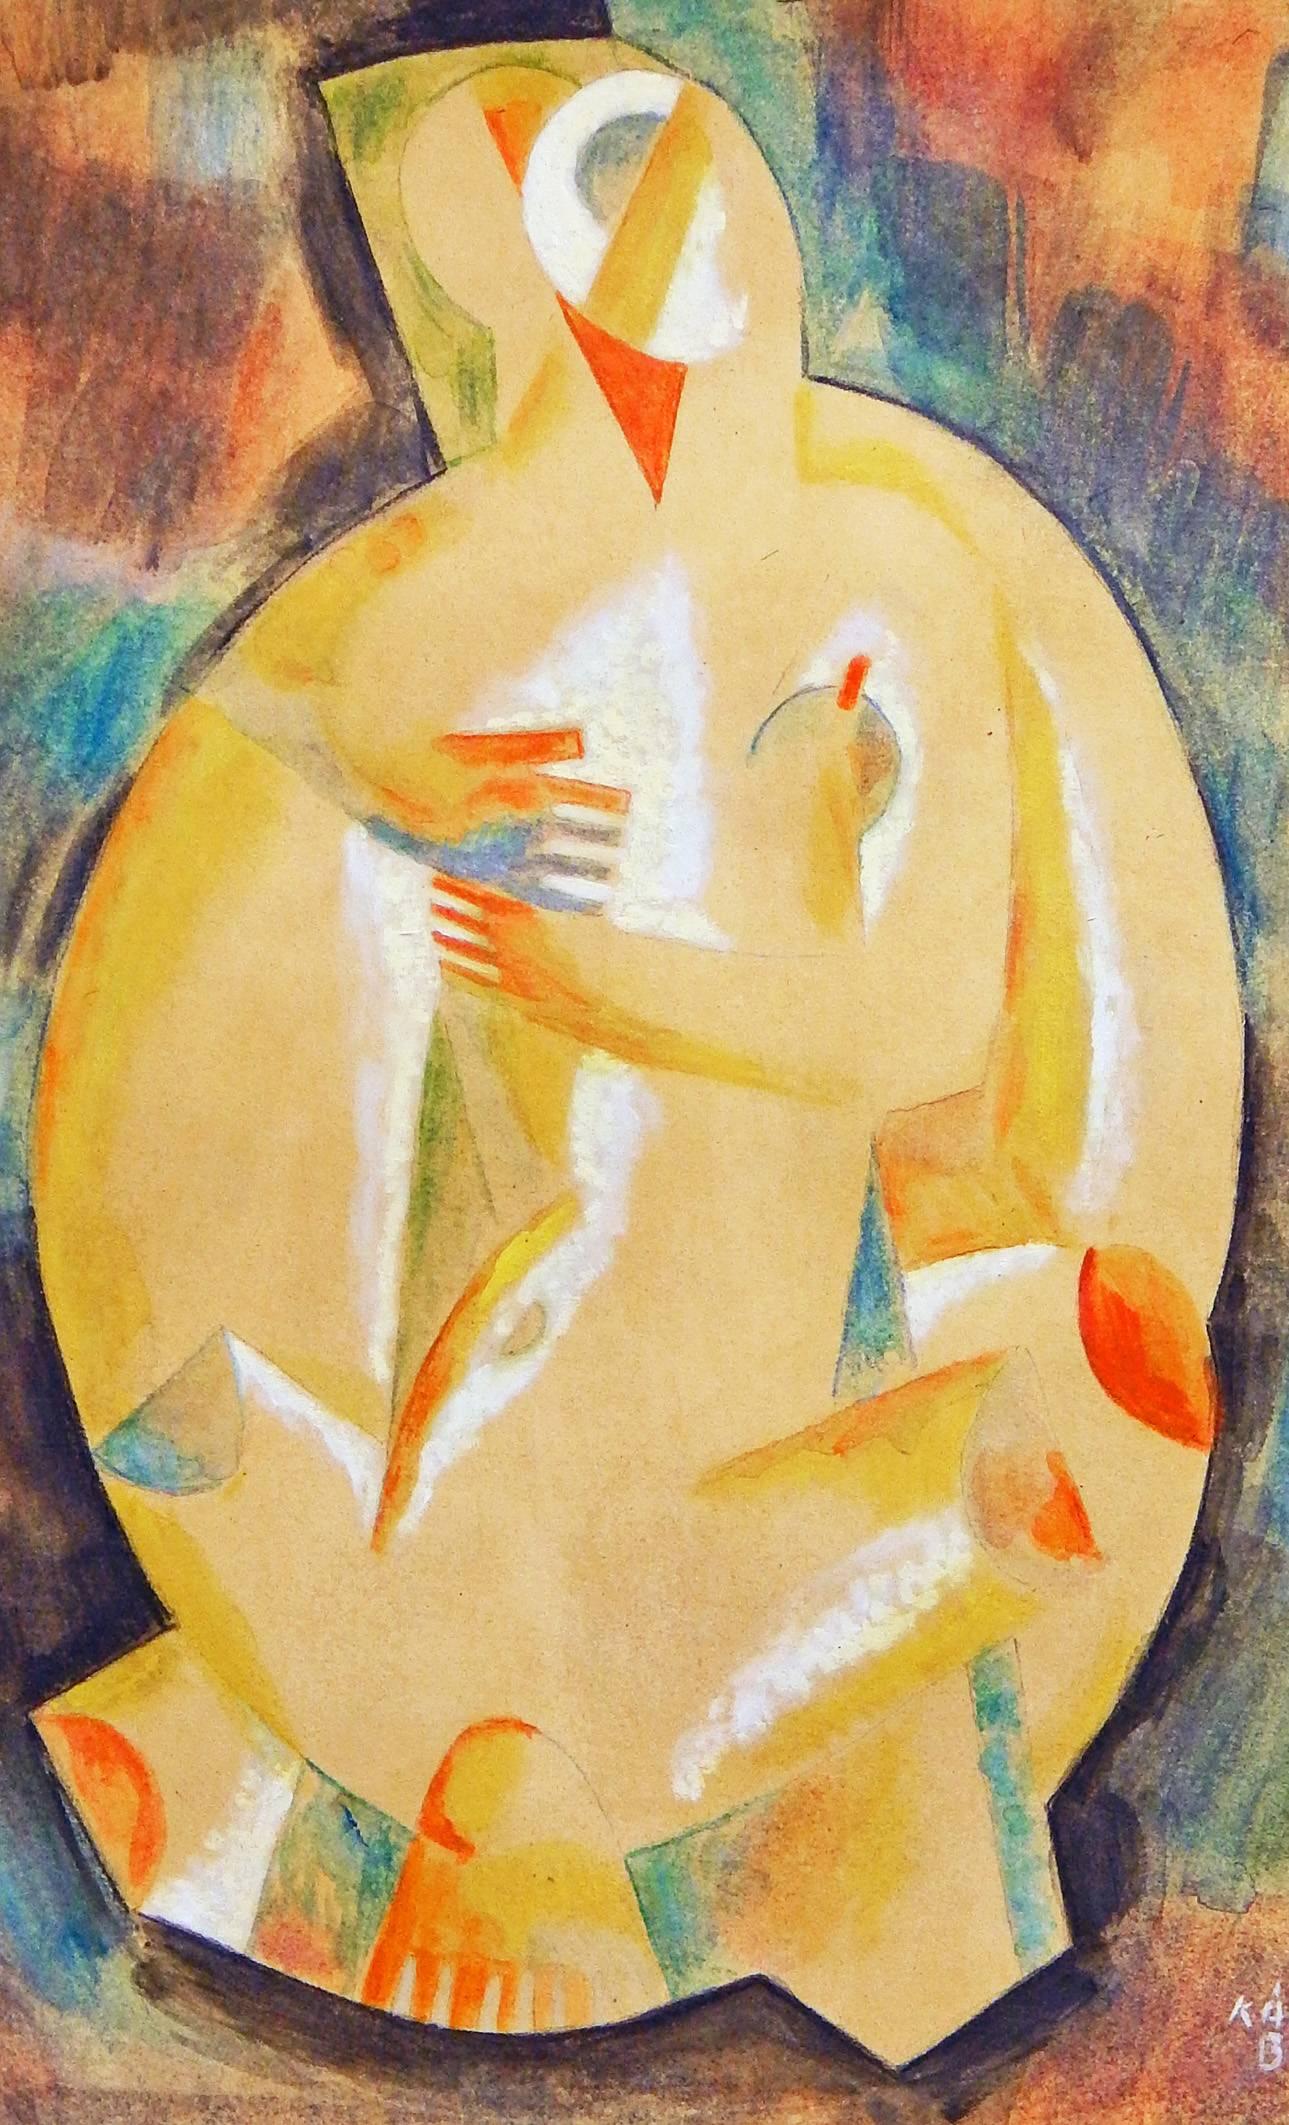 Brilliantly painted in striking shades of tomato red, green-blue and chalky white, this painting was made by Béla Kádár, increasingly appreciated and collected today as Hungary's great master of Cubist and Art Deco-inspired figural paintings.